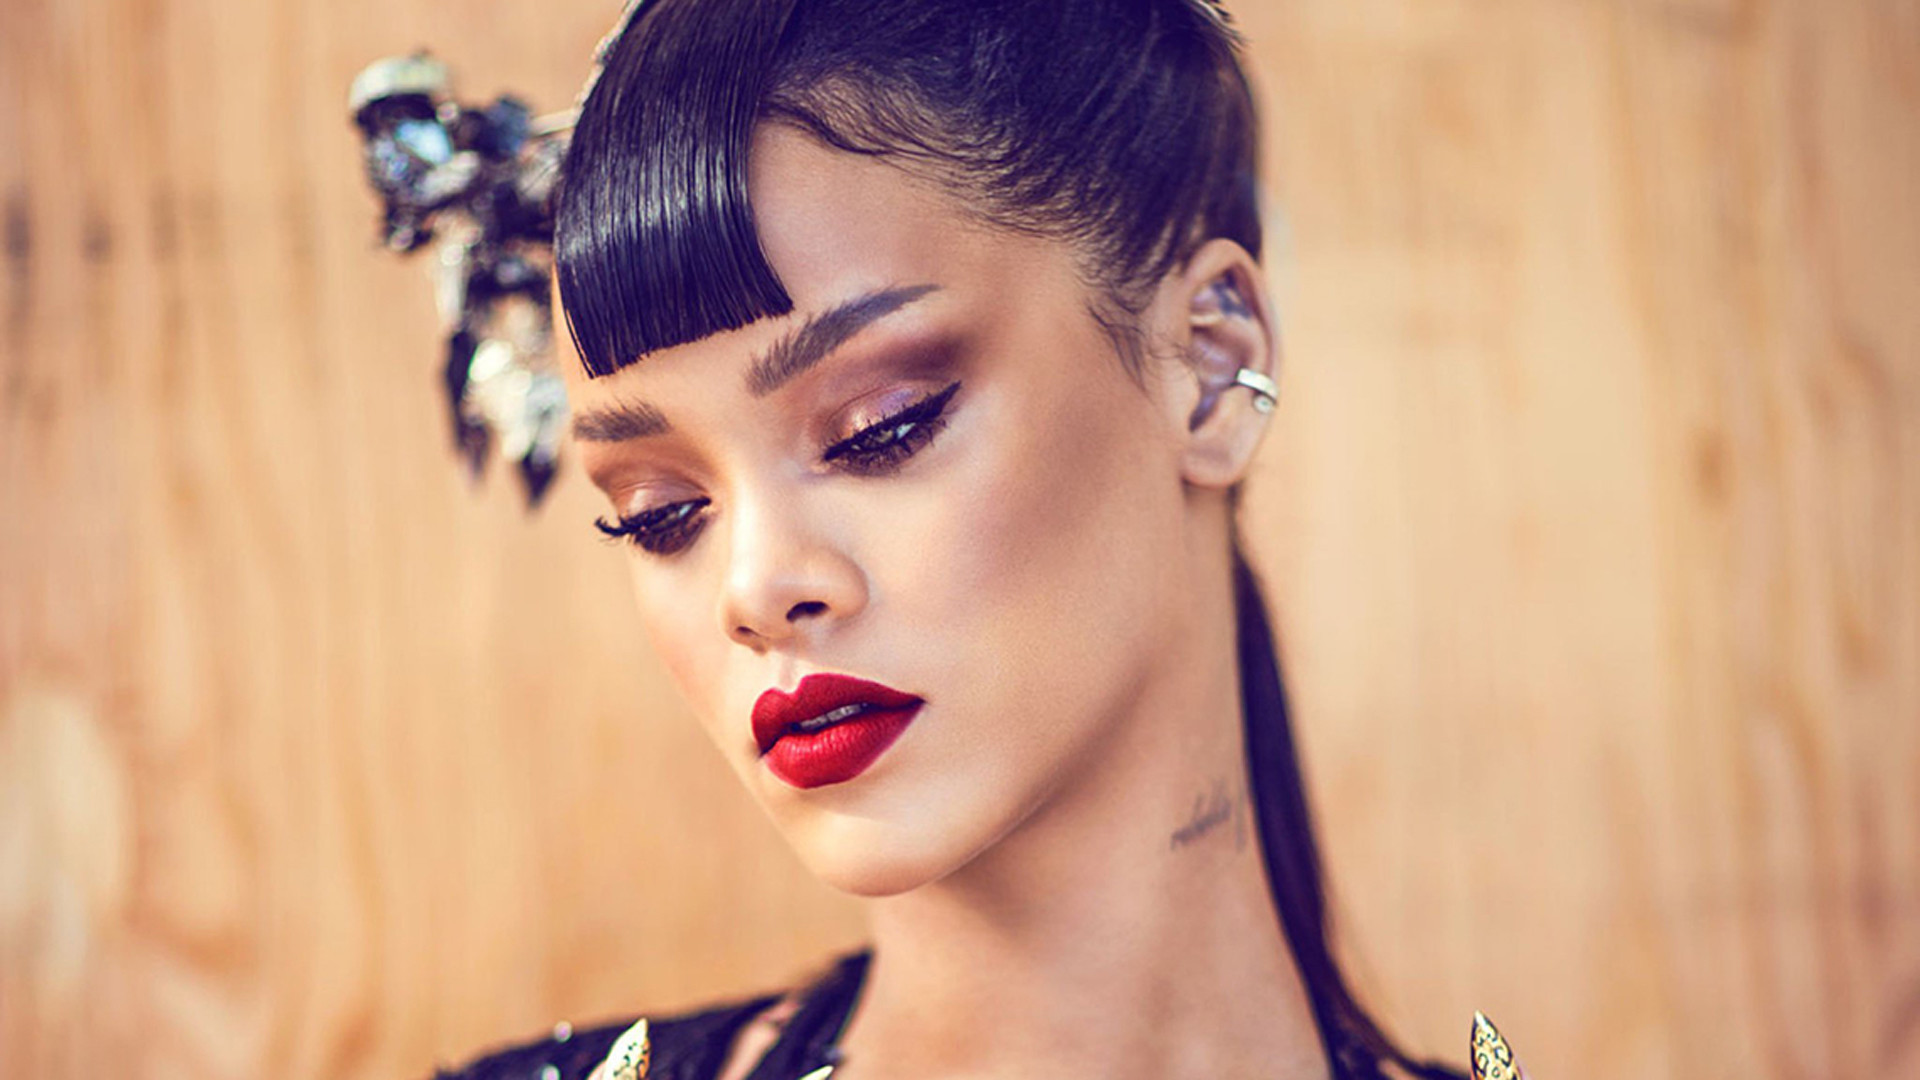 1920x1080  You are viewing wallpaper titled "Rihanna .